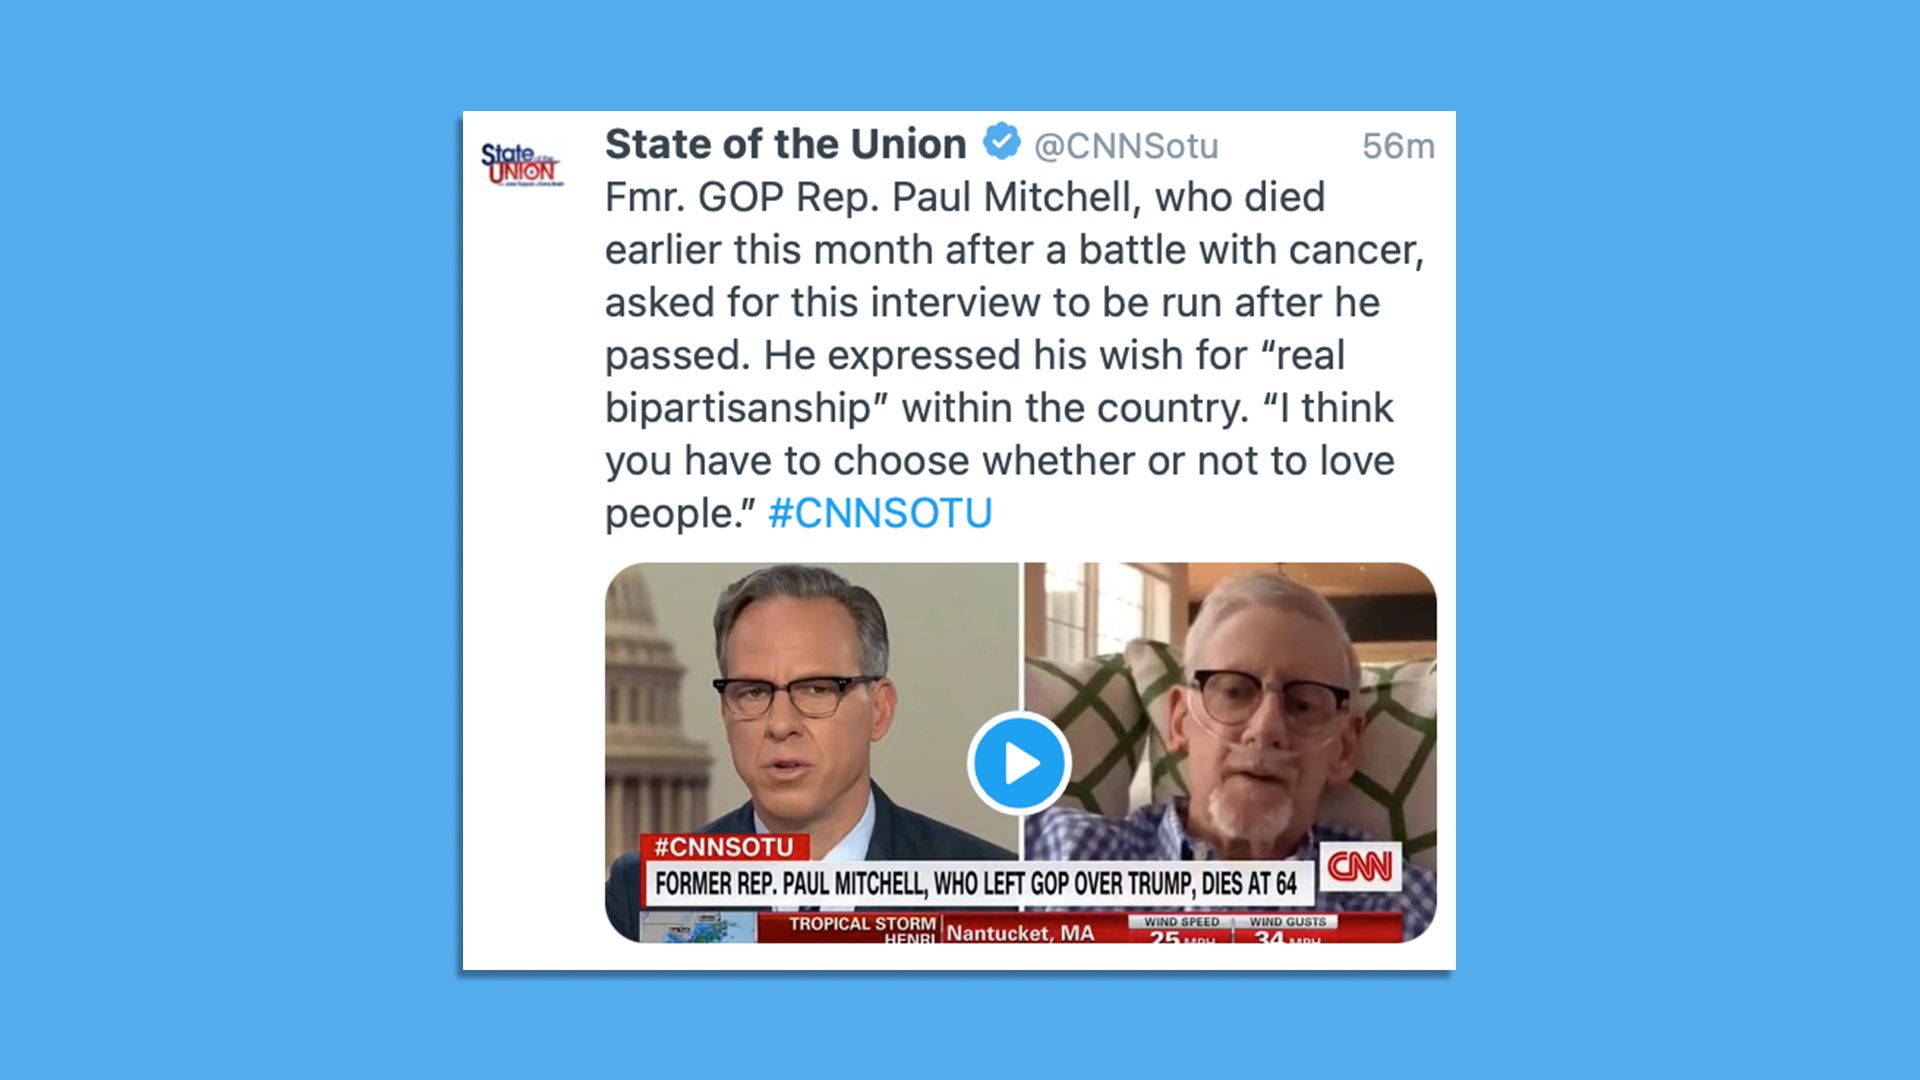 A screenshot shows CNN's Jake Tapper conducting an interview with the late Rep. Paul Mitchell.